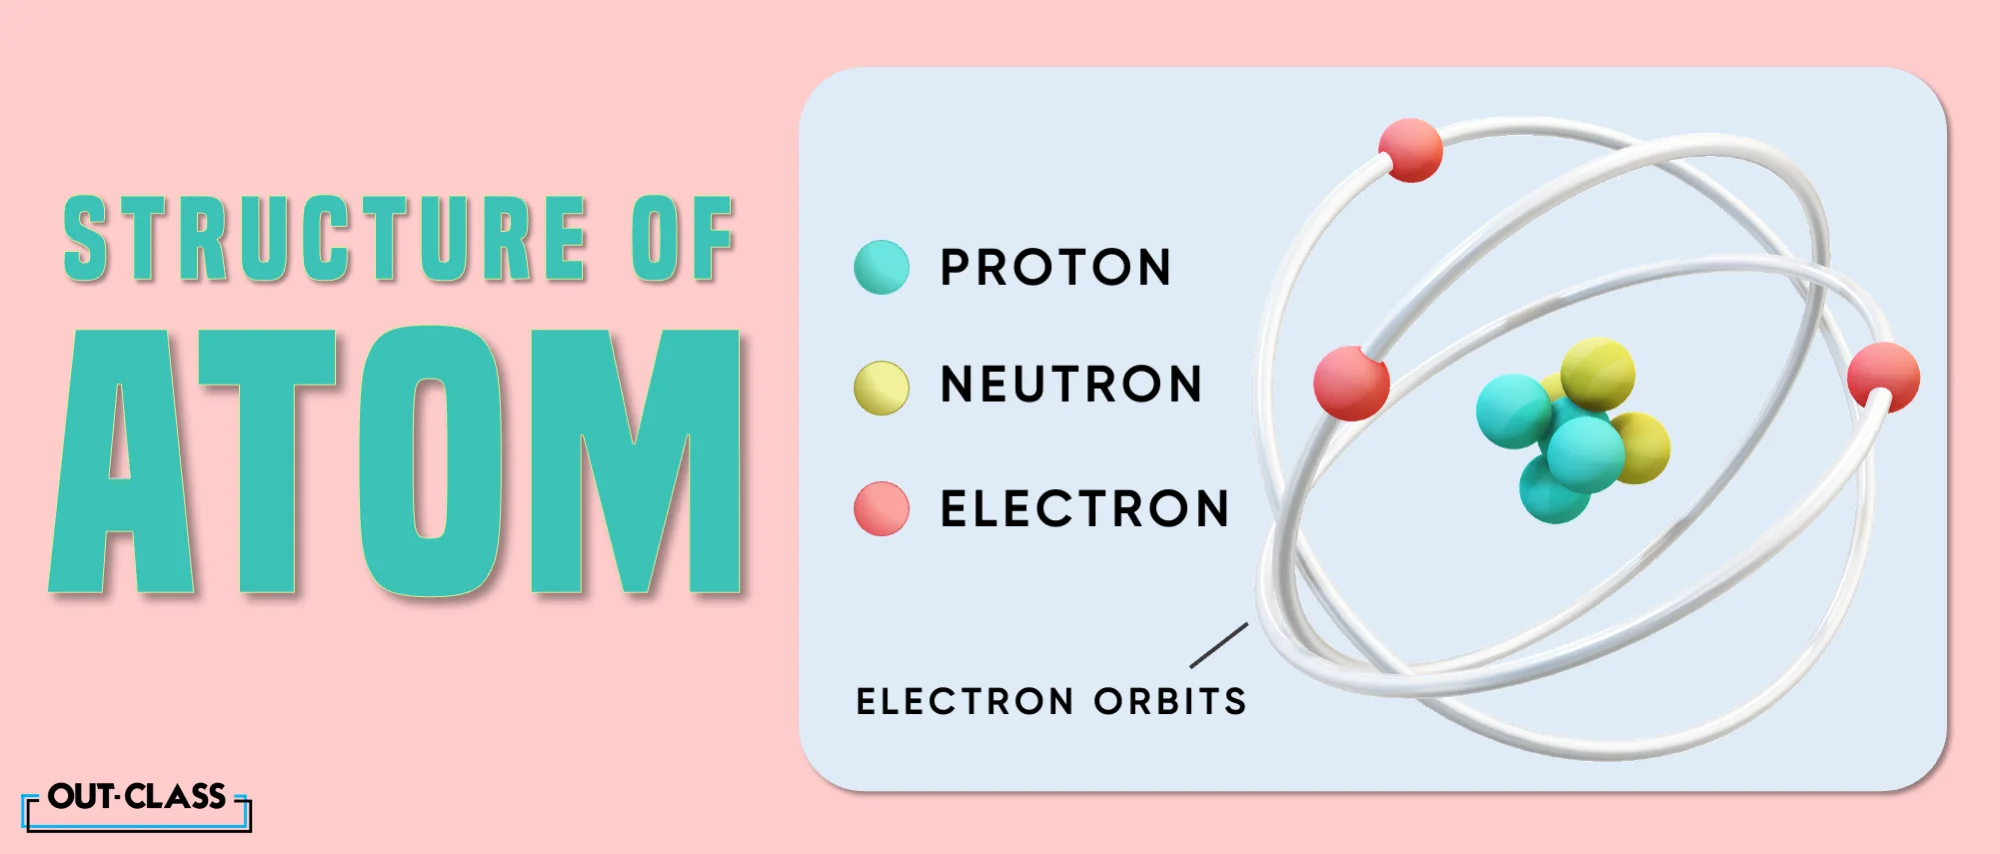 The structure of an atom is one of the basic difference between an atom and an ion. 